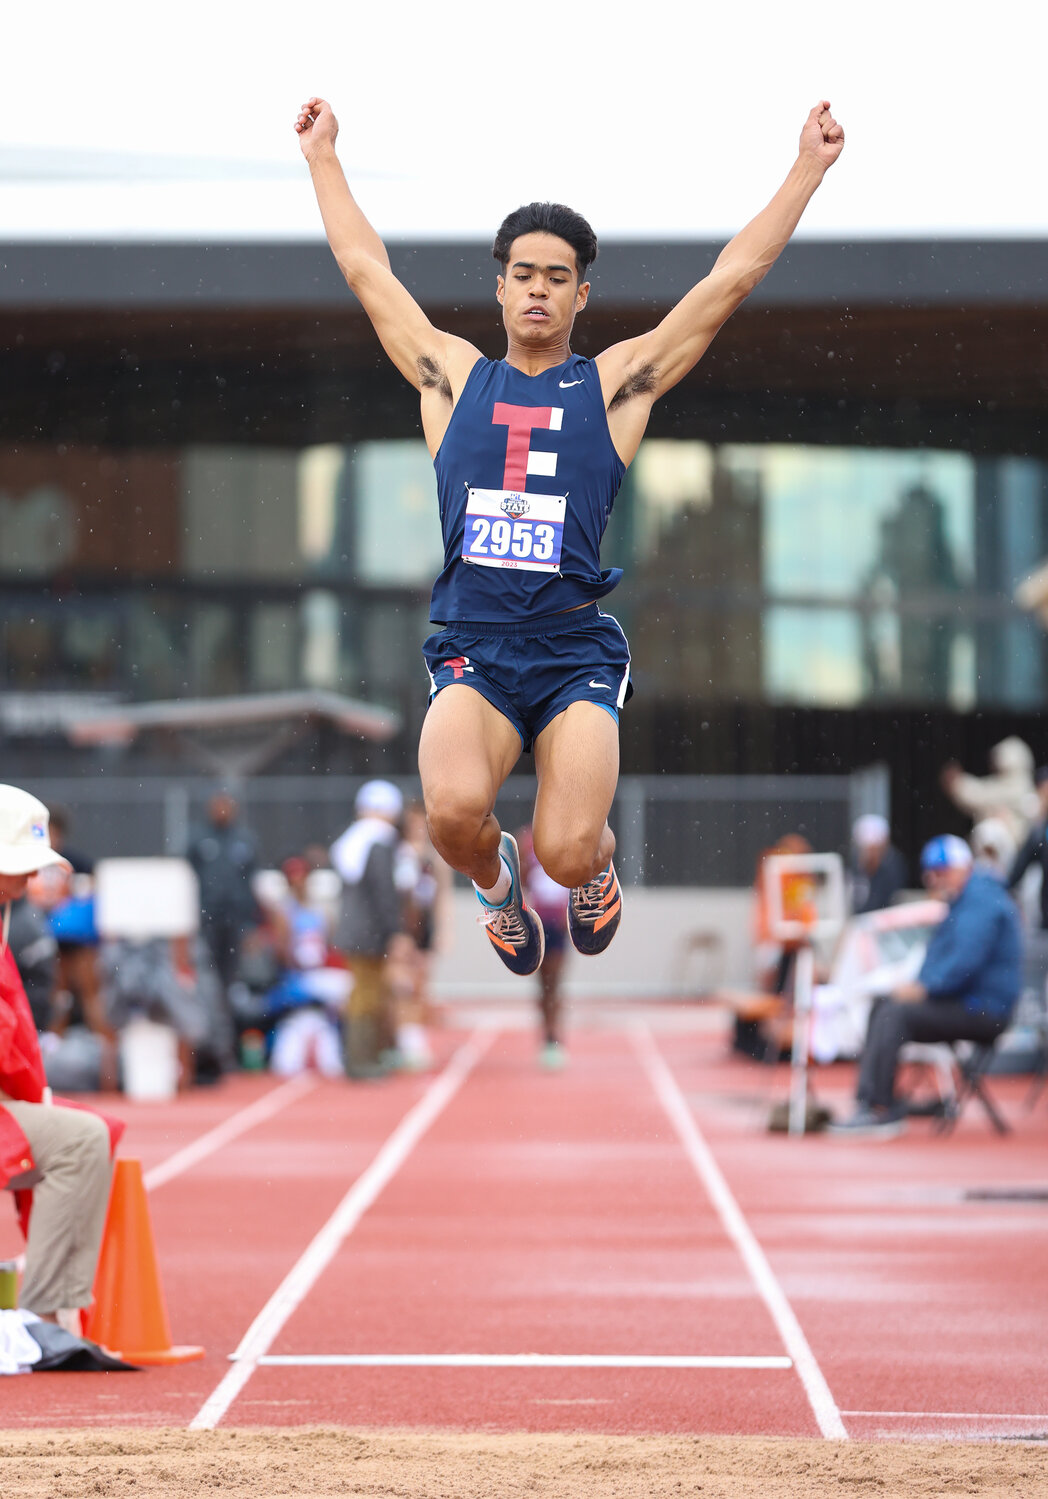 Jayden Keys of Tompkins High School (2953) competes in the Class 6A boys triple jump during the UIL State Track and Field Meet on Saturday, May 13, 2023 in Austin.